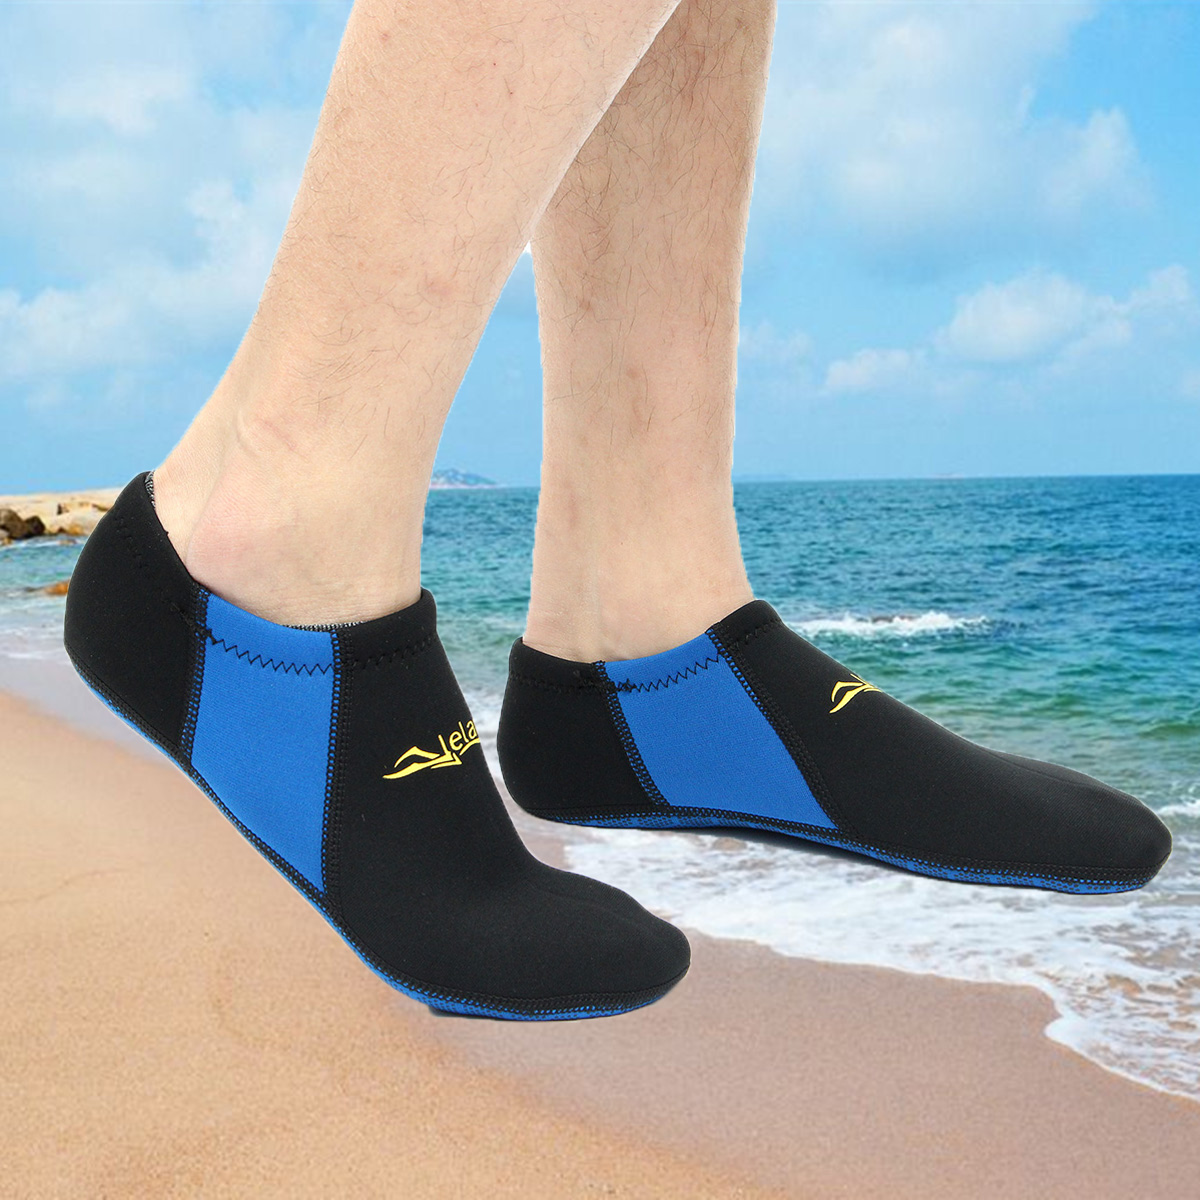 Outdoor-Swimming-Snorkel-Socks-Soft-Beach-Shoes-Water-Sport-Scuba-Surf-Diving-1130872-14